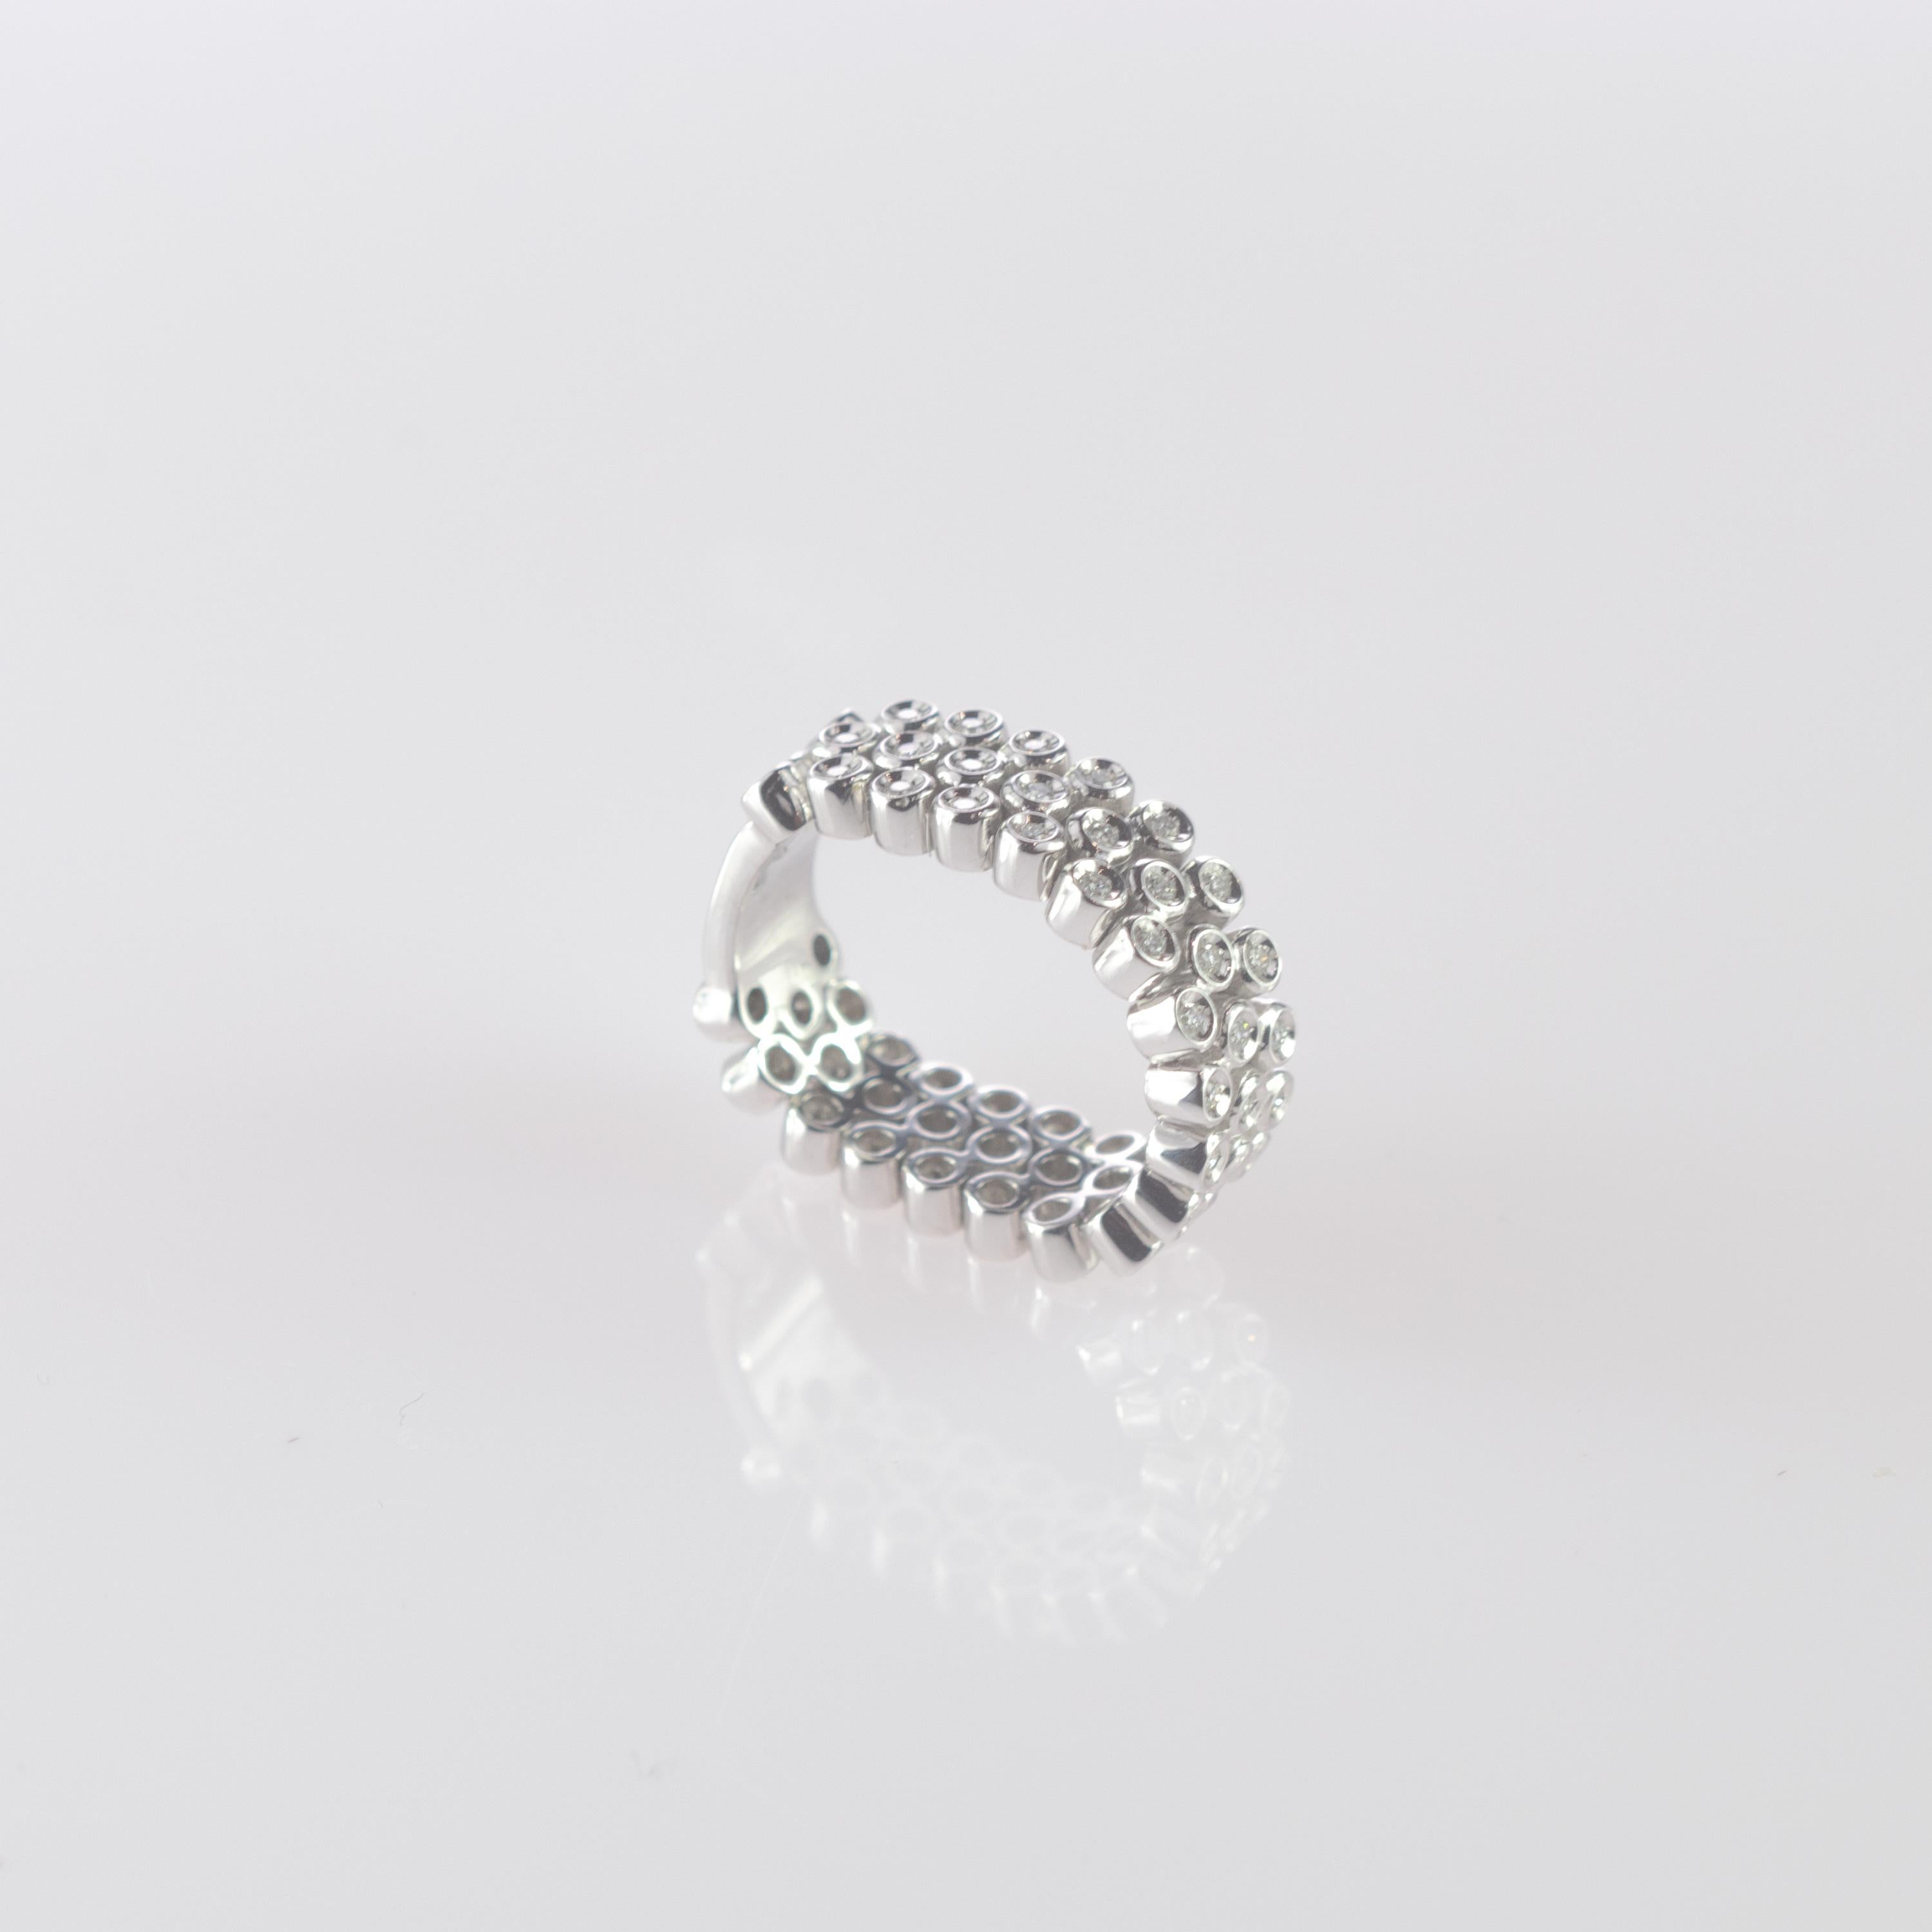 Rare and magnificent flexible band ring. 0.85 diamond carats helded in a 18 karat white gold structure. The ring has an exquisite and modern design that holds 57 stunning diamonds in a brilliant shape.
 
At intini all our jewels have a personality